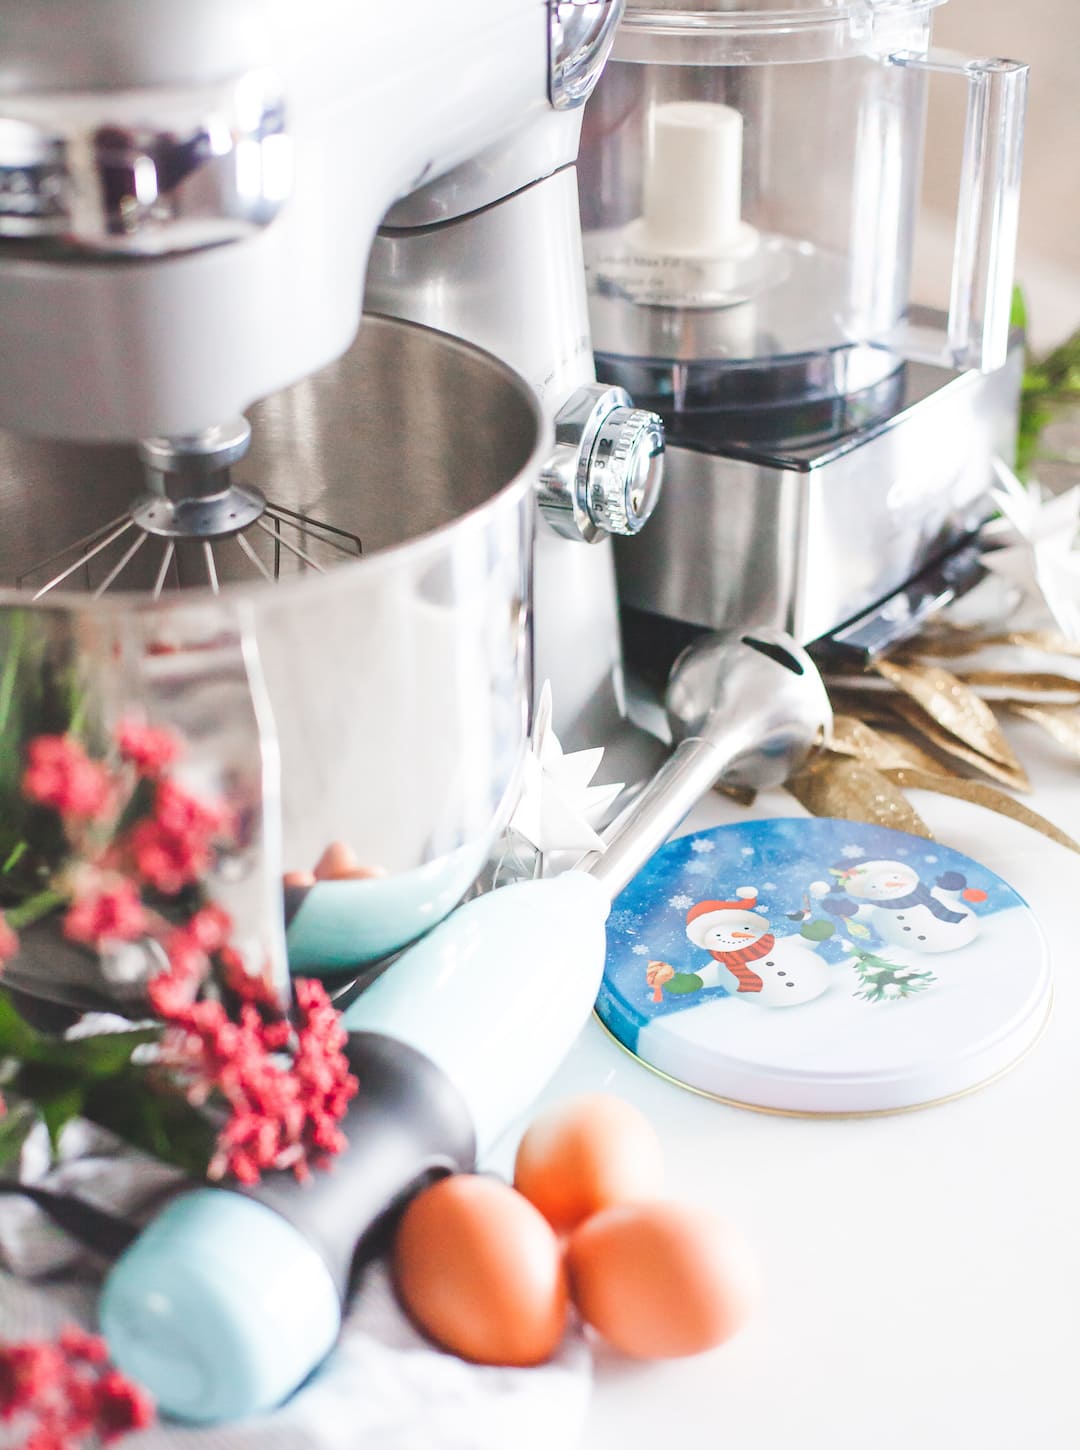 Christmas Gift Guide for Those who love to Cook...and Eat!